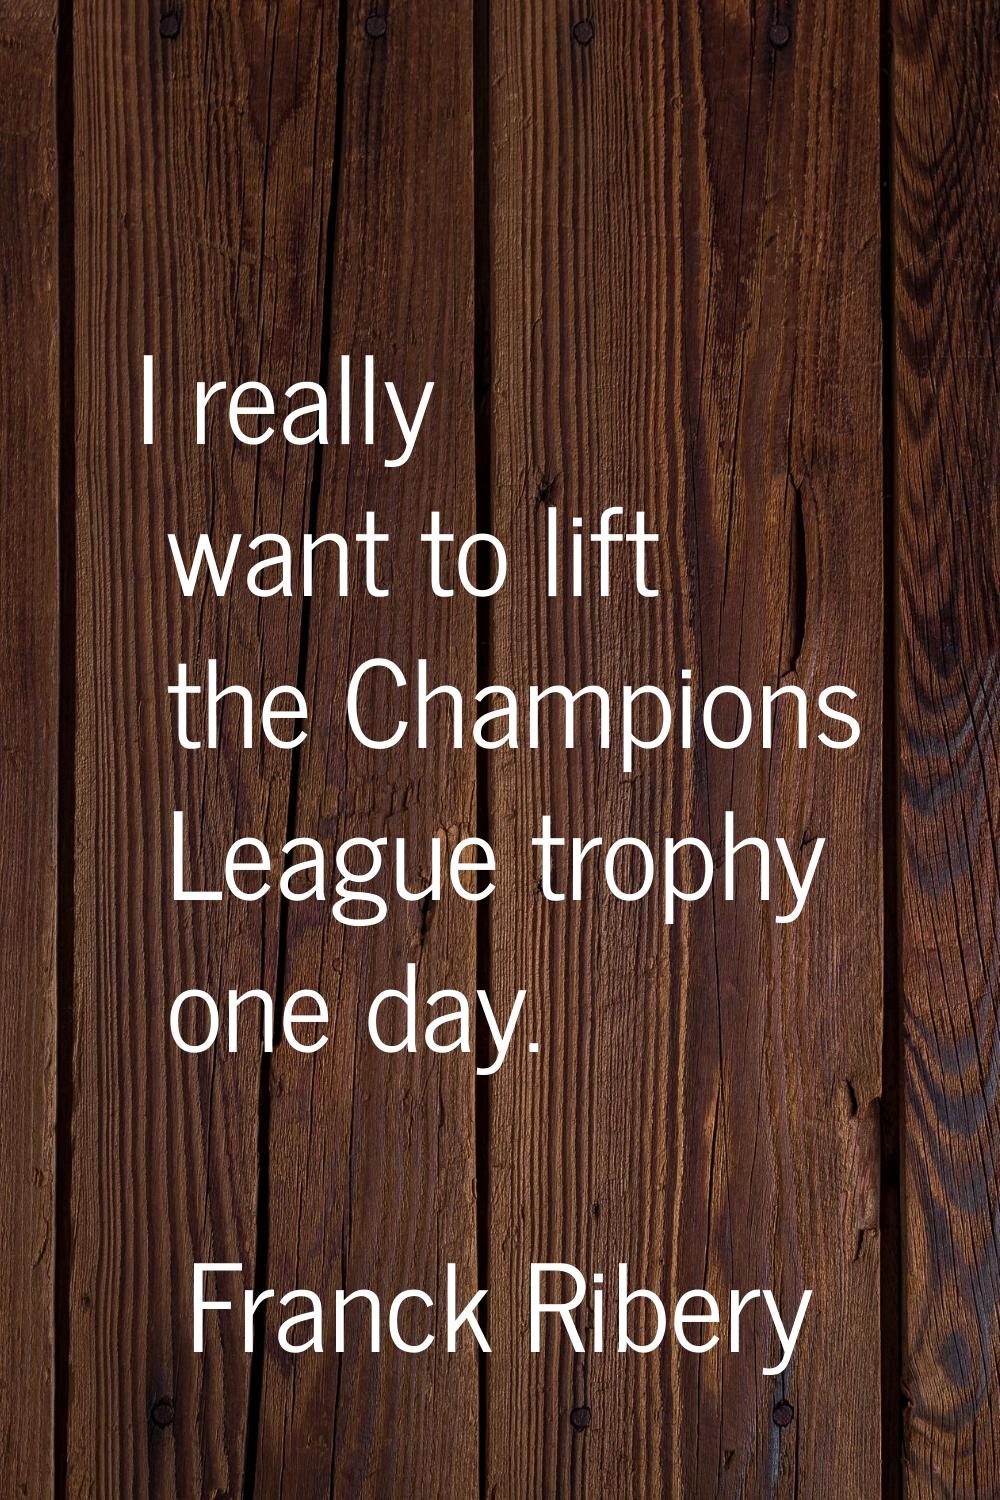 I really want to lift the Champions League trophy one day.